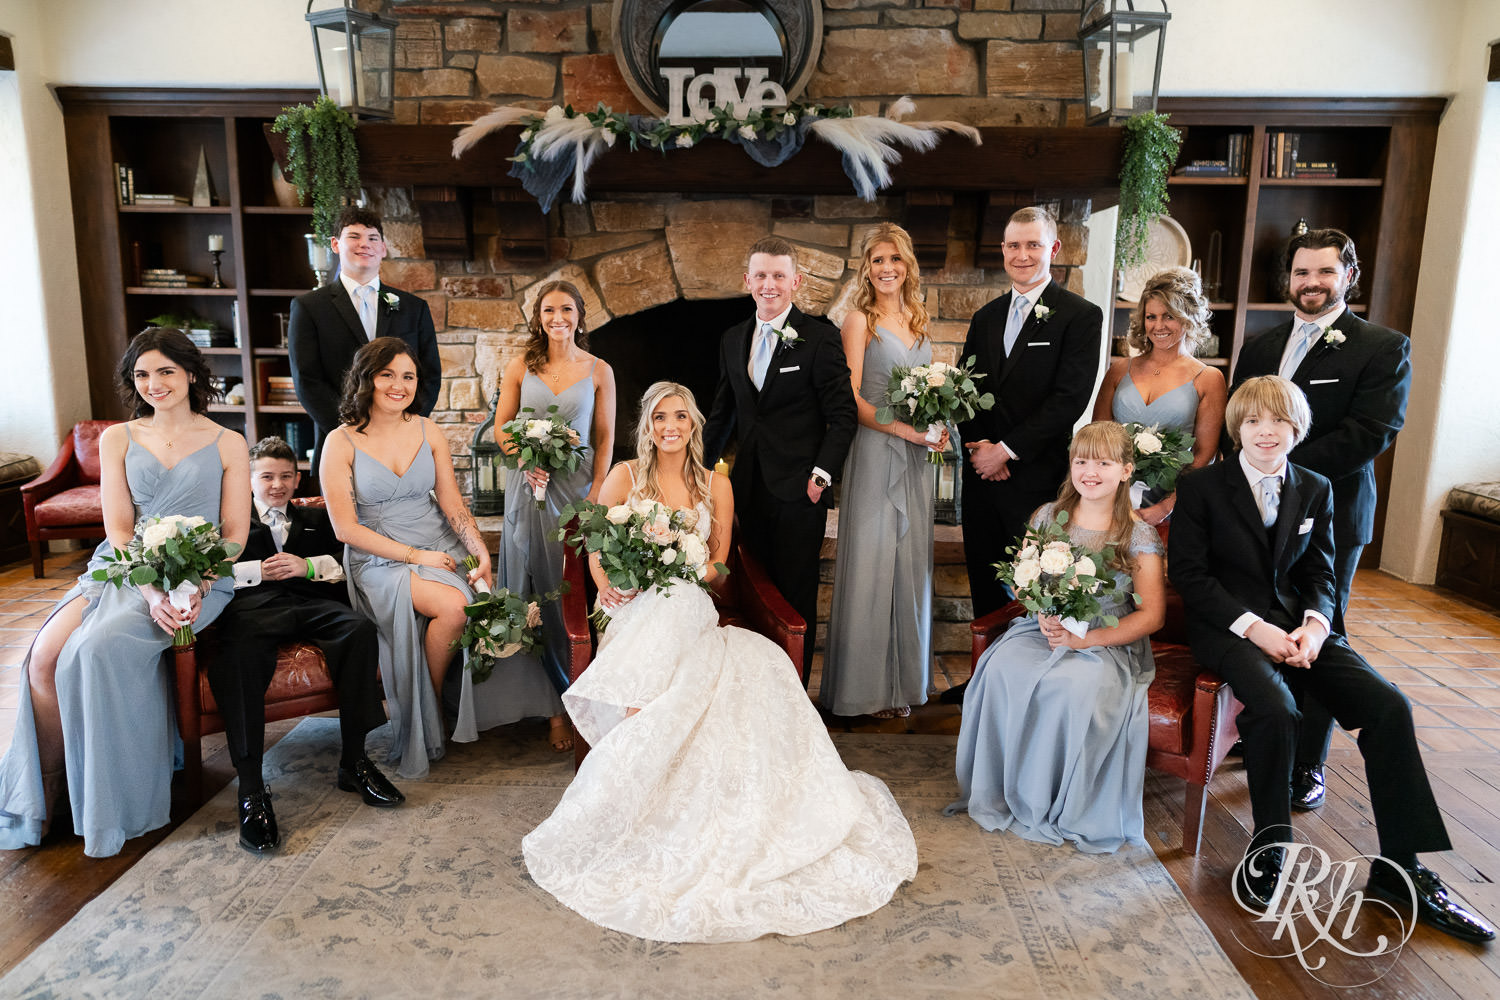 Wedding party smiles with the bride and groom during wedding photography at Bavaria Downs in Chaska, Minnesota.